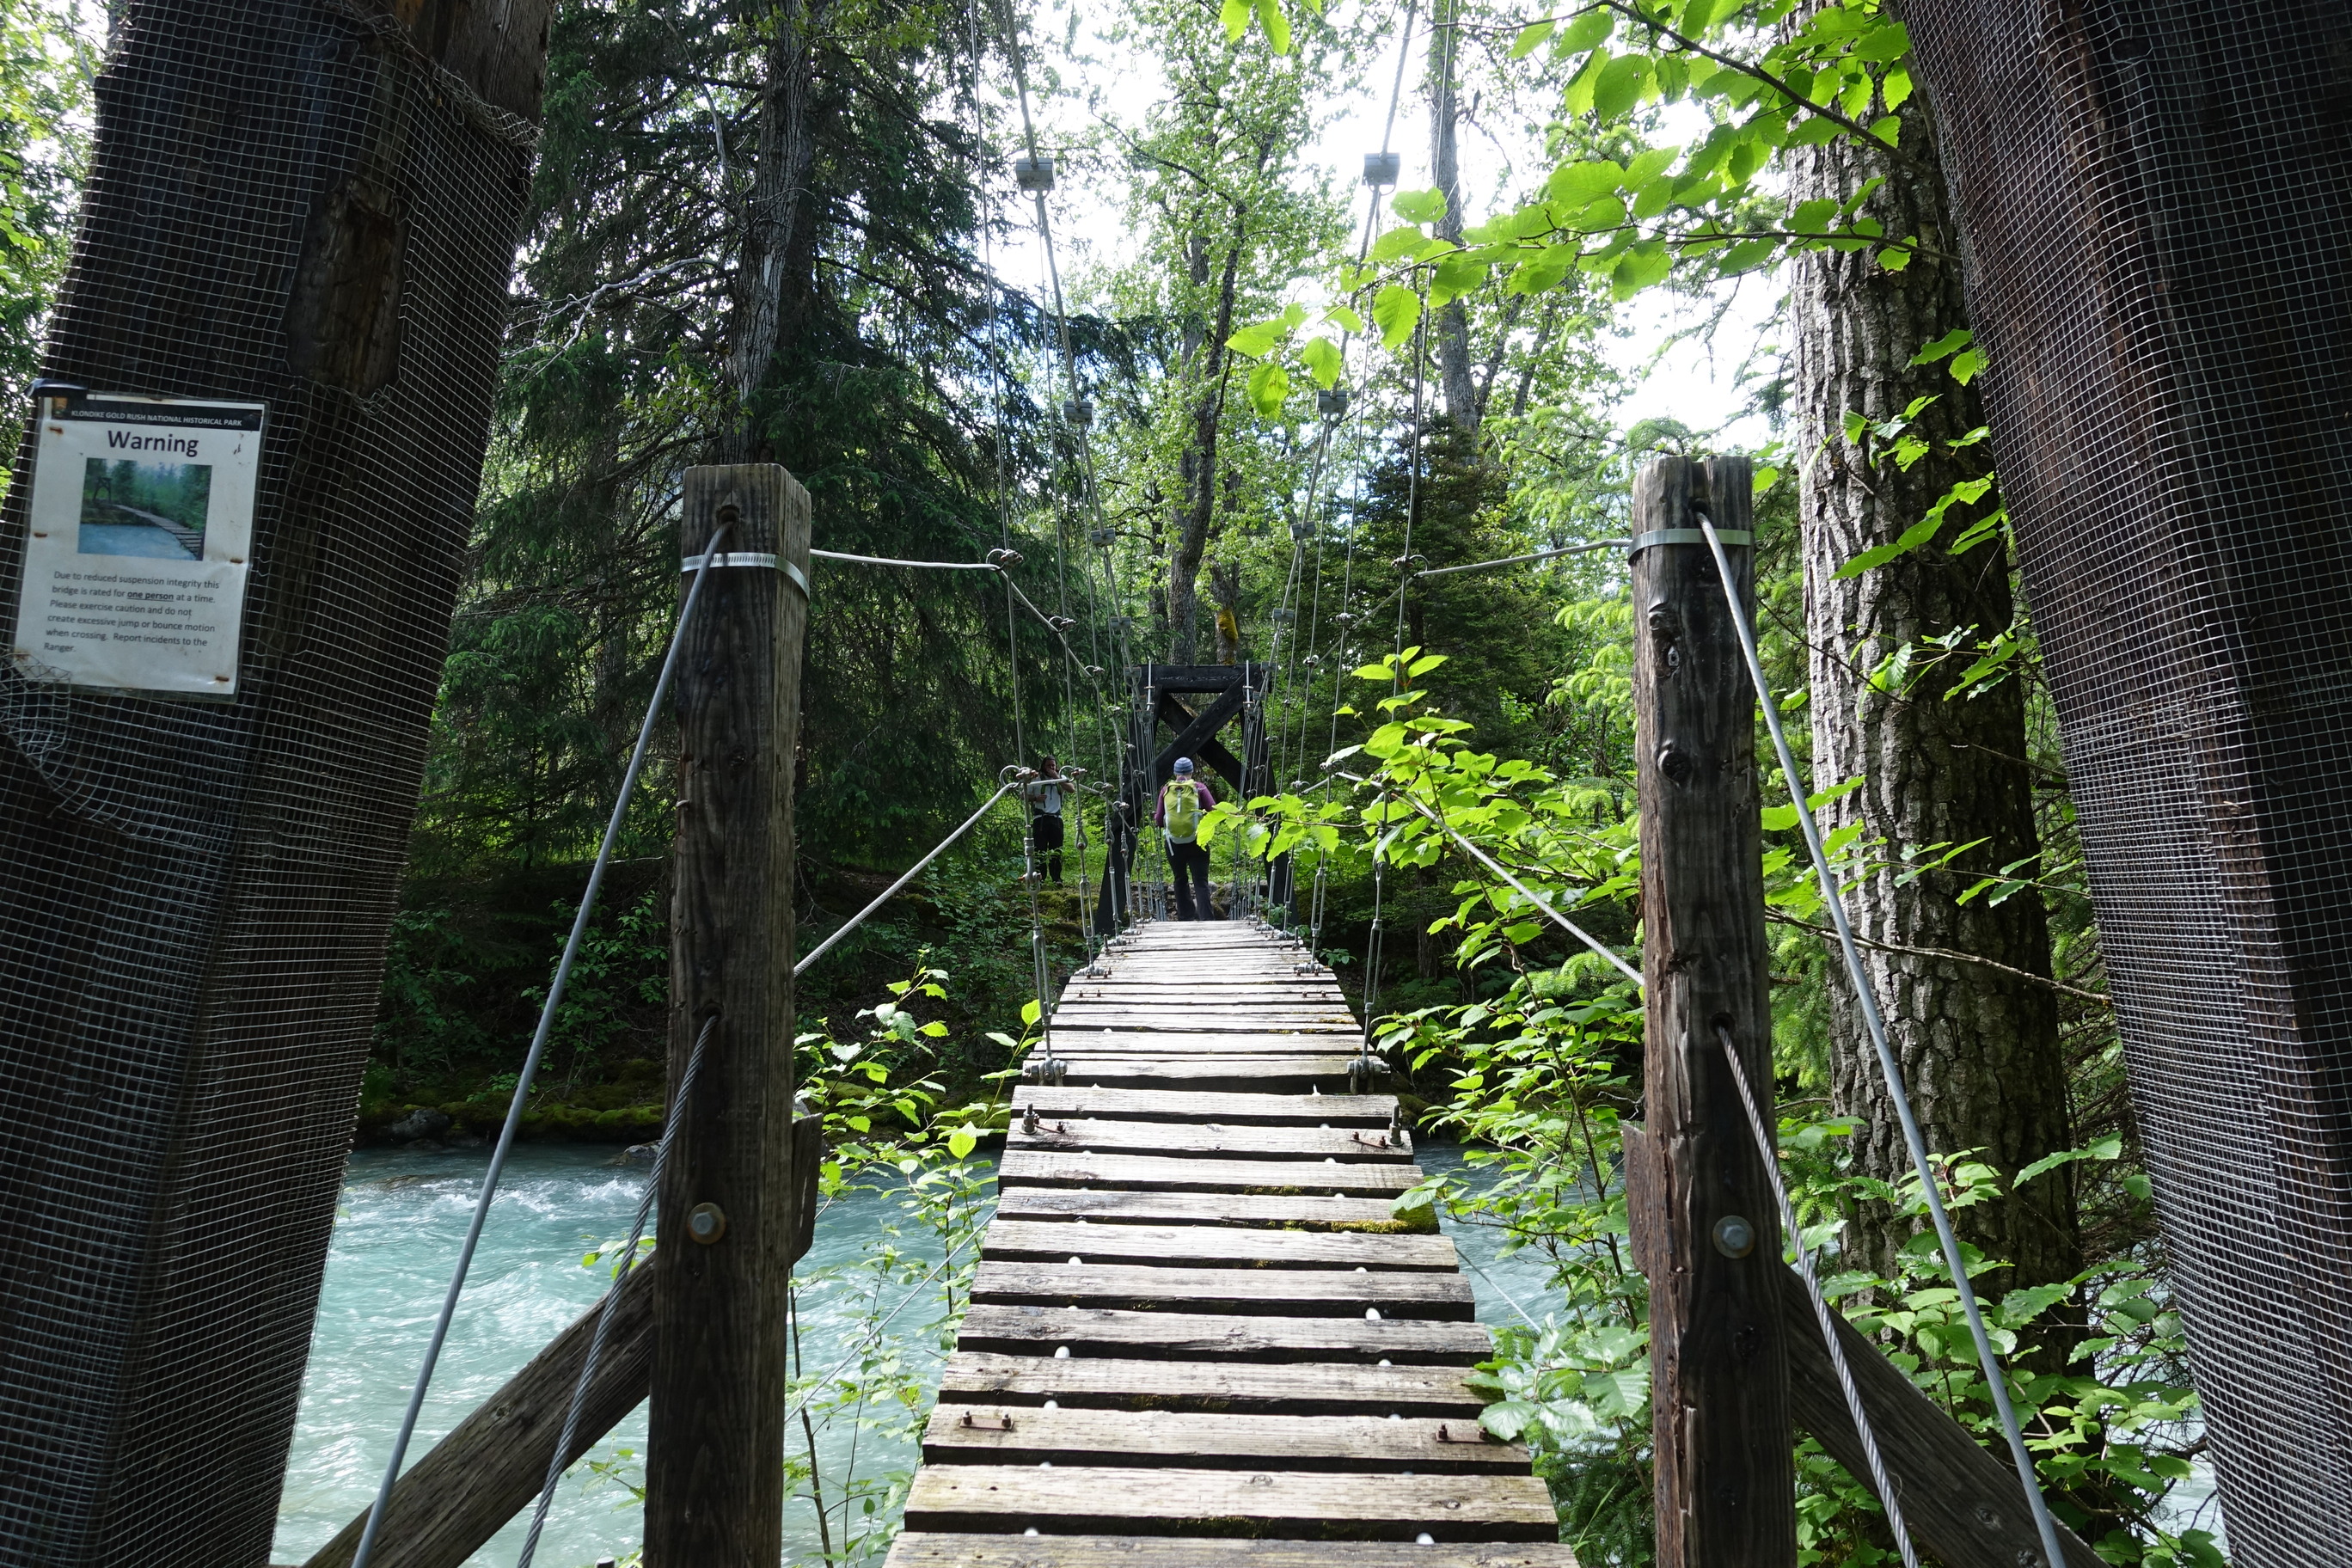 A suspension bridge at Canyon City. There is a sign reading "Warning: Due to reduced suspension integrity this bridge is rated for one person at a time. Please exercise caution and do not create excessive jump or bounce motion when cross. Report incidents to the Ranger."